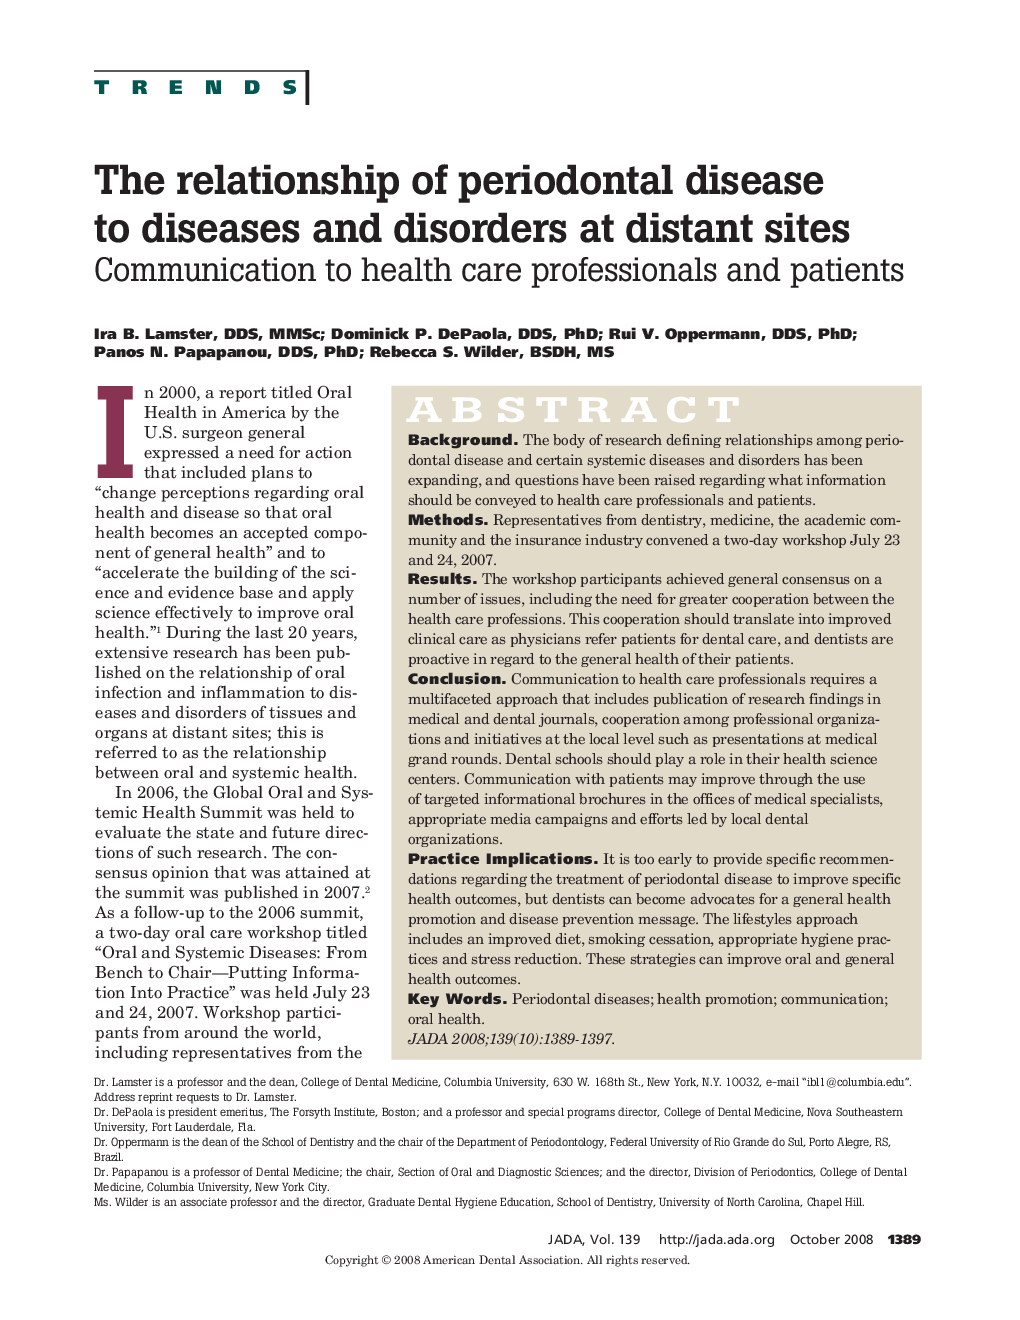 The Relationship of Periodontal Disease to Diseases and Disorders at Distant Sites : Communication to Health Care Professionals and Patients